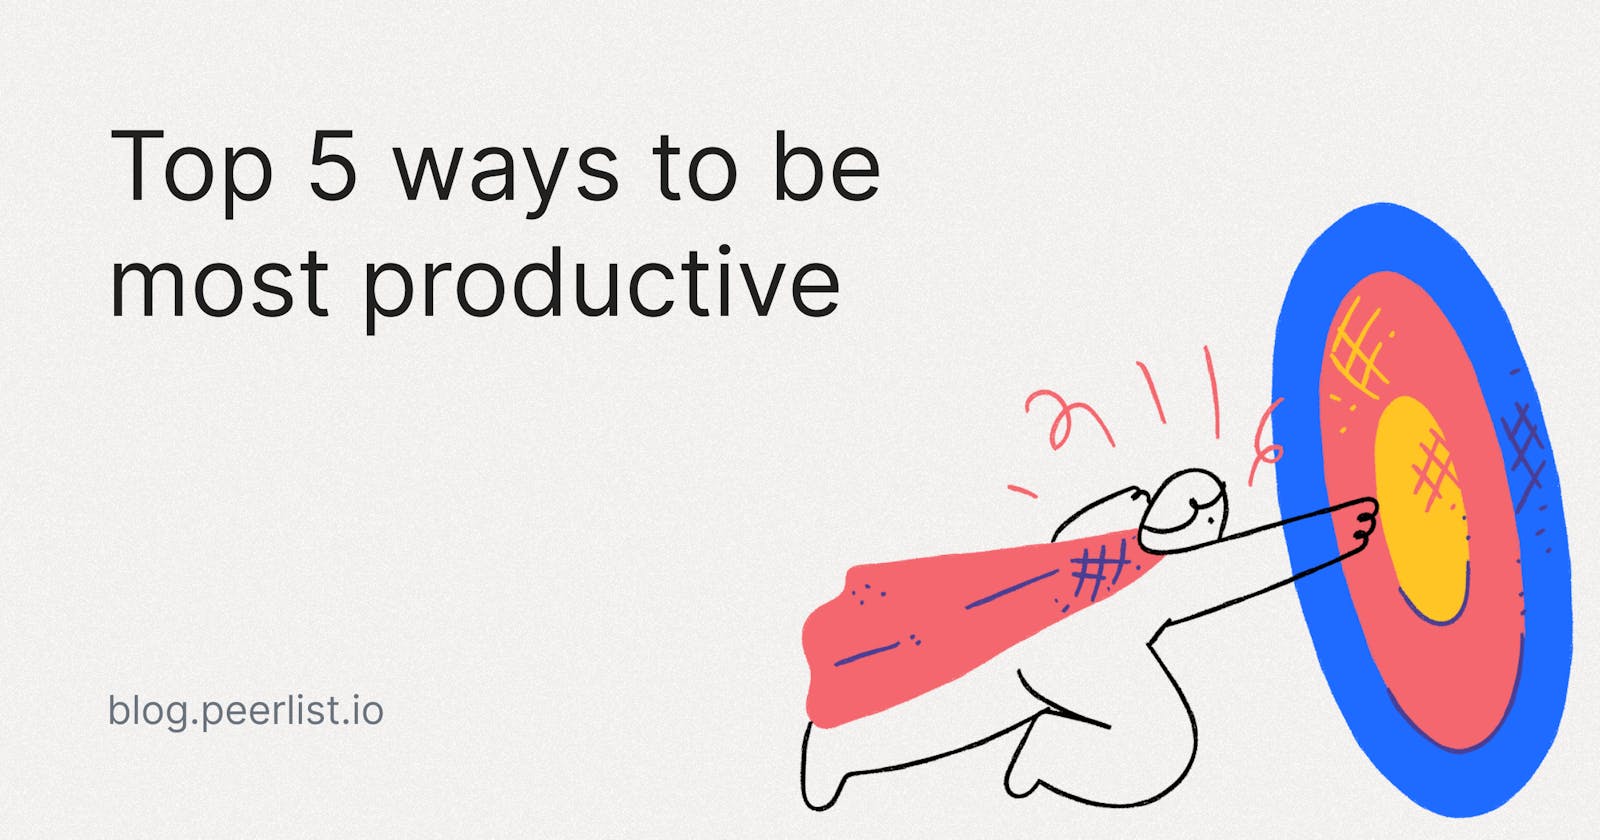 Top 5 ways to be most productive